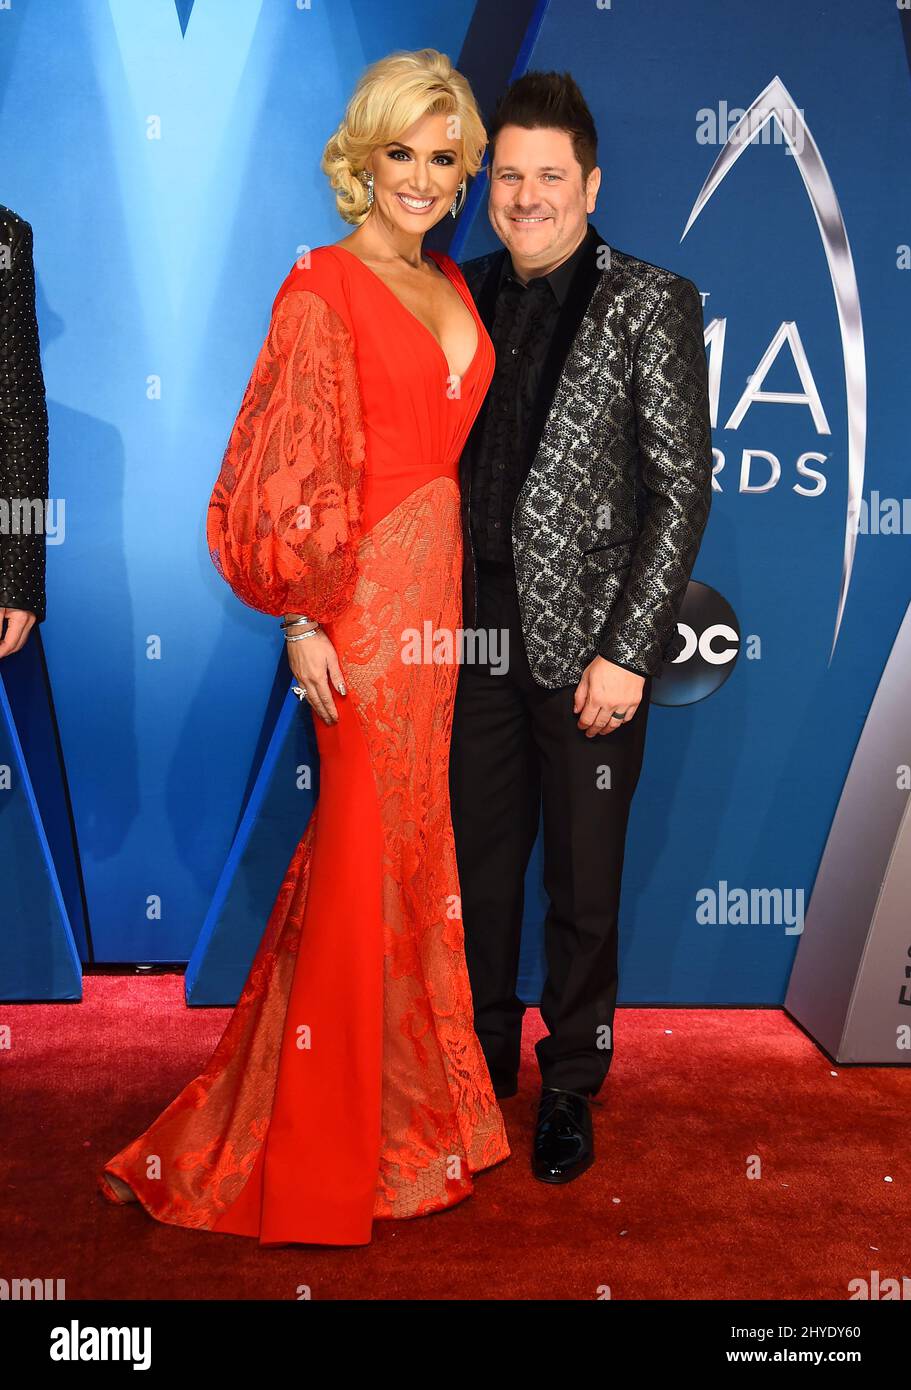 Jay DeMarcus and Allison Alderson attending the 51st Annual Country Music Association Awards, held at the Bridgestone Arena in Nashville, Tennessee Stock Photo